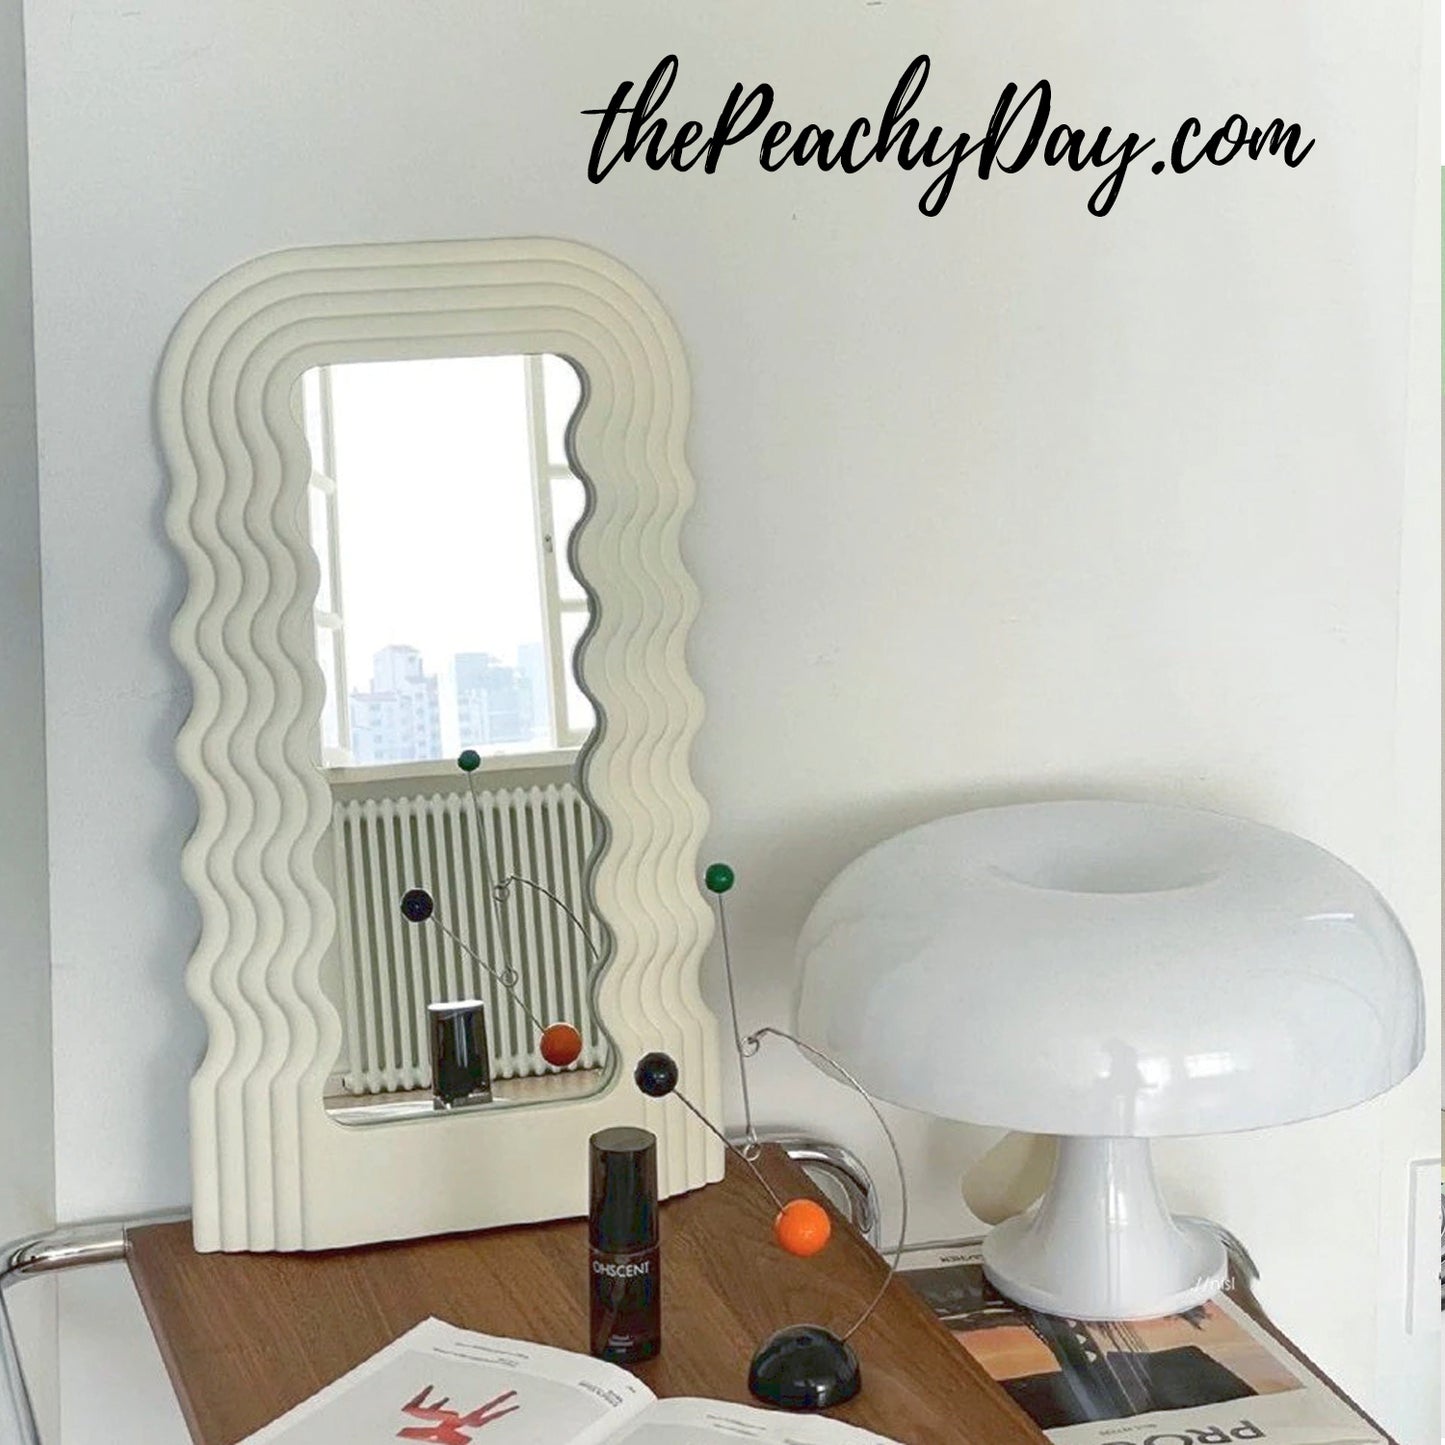 Aesthetic Mirror with Wave Irregular Frame